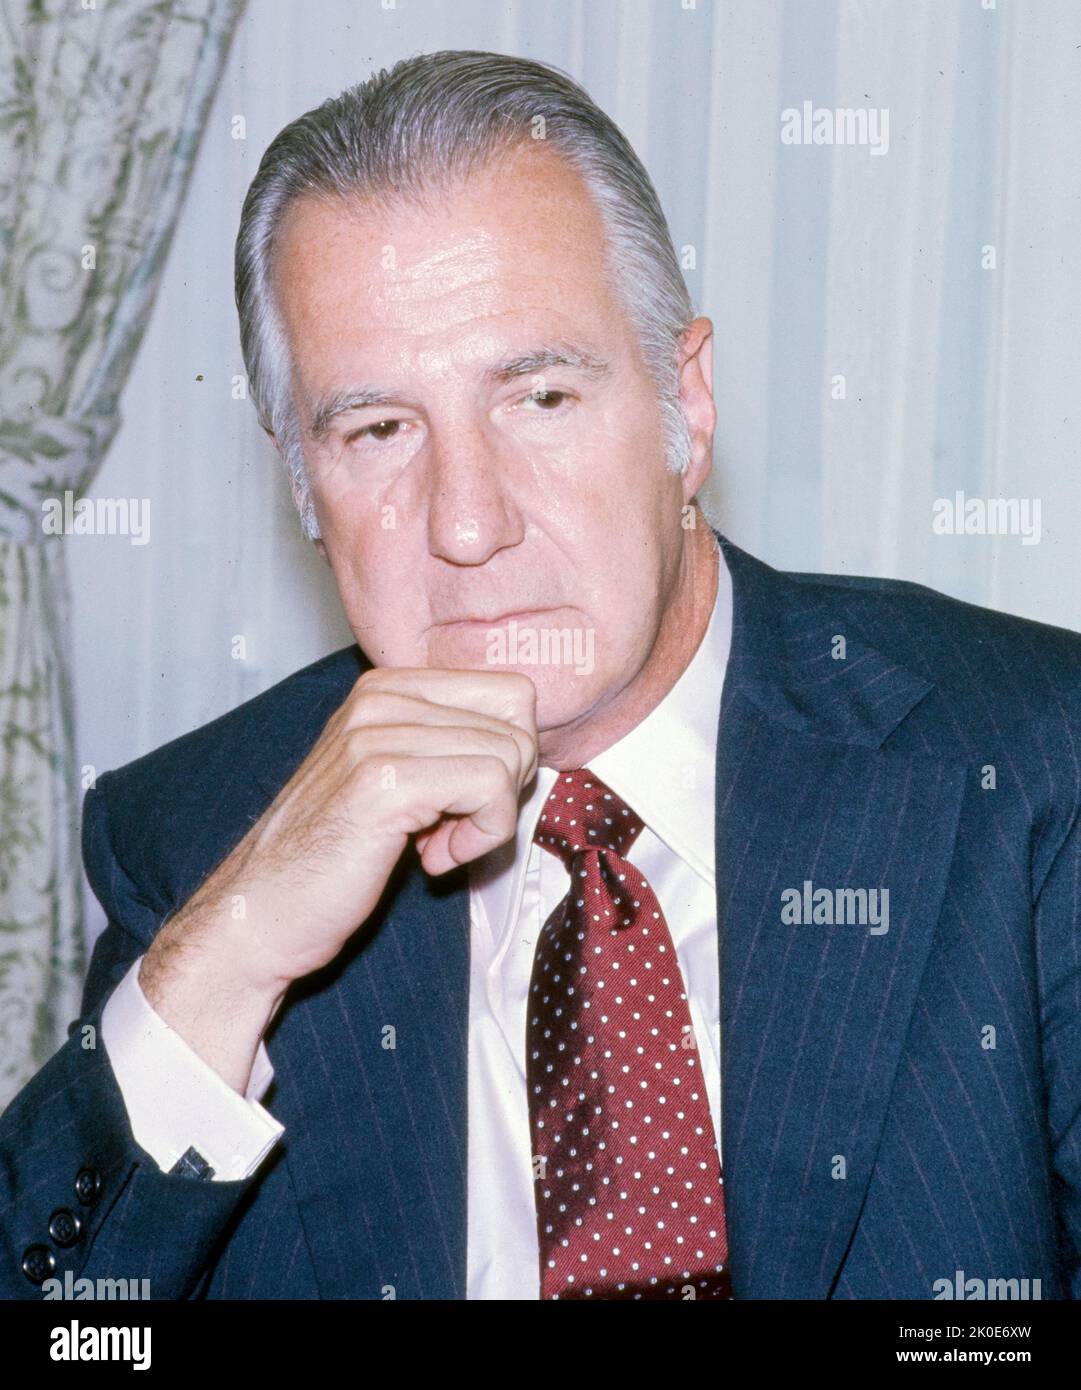 Spiro Theodore Agnew (1918 - 1996) 39th vice-president of the United States, serving from 1969 until his resignation in 1973. He is the second and most recent vice-president to resign the position, the other being John C. Calhoun in 1832. Stock Photo